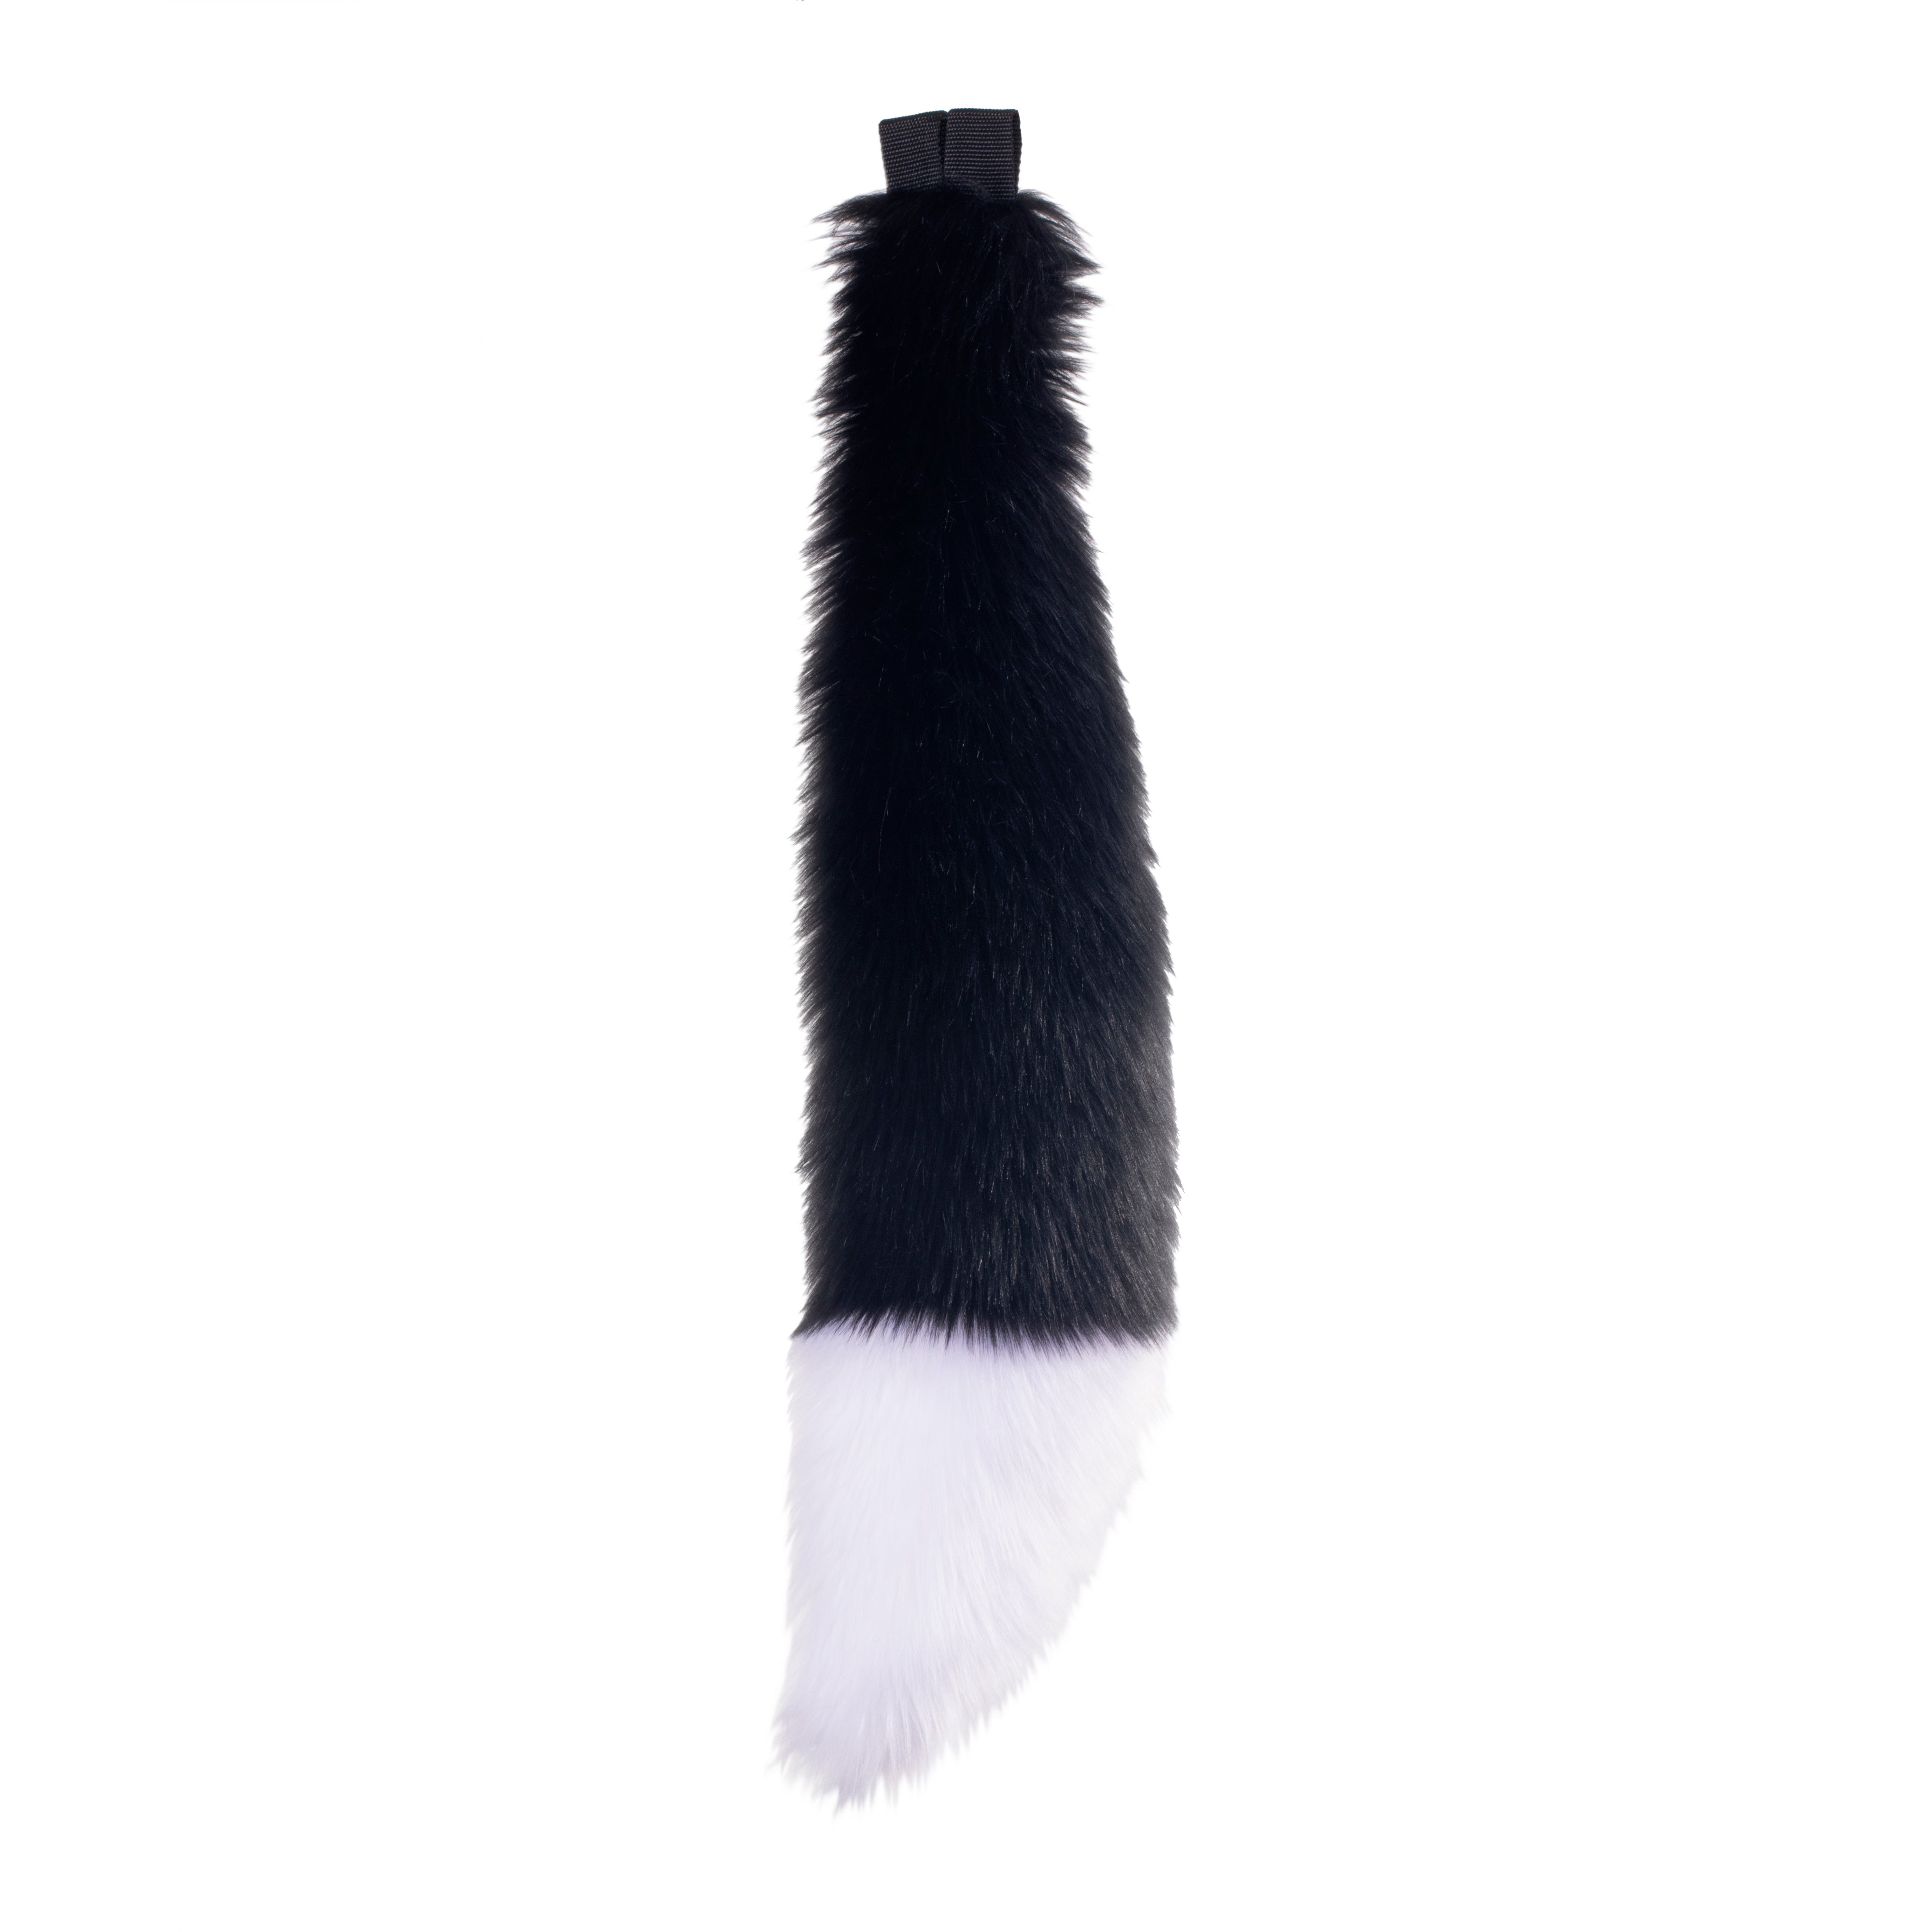 white and black Pawstar furry fluffy faux fur yip tip fox tail. For costumes, cosplay and furry.